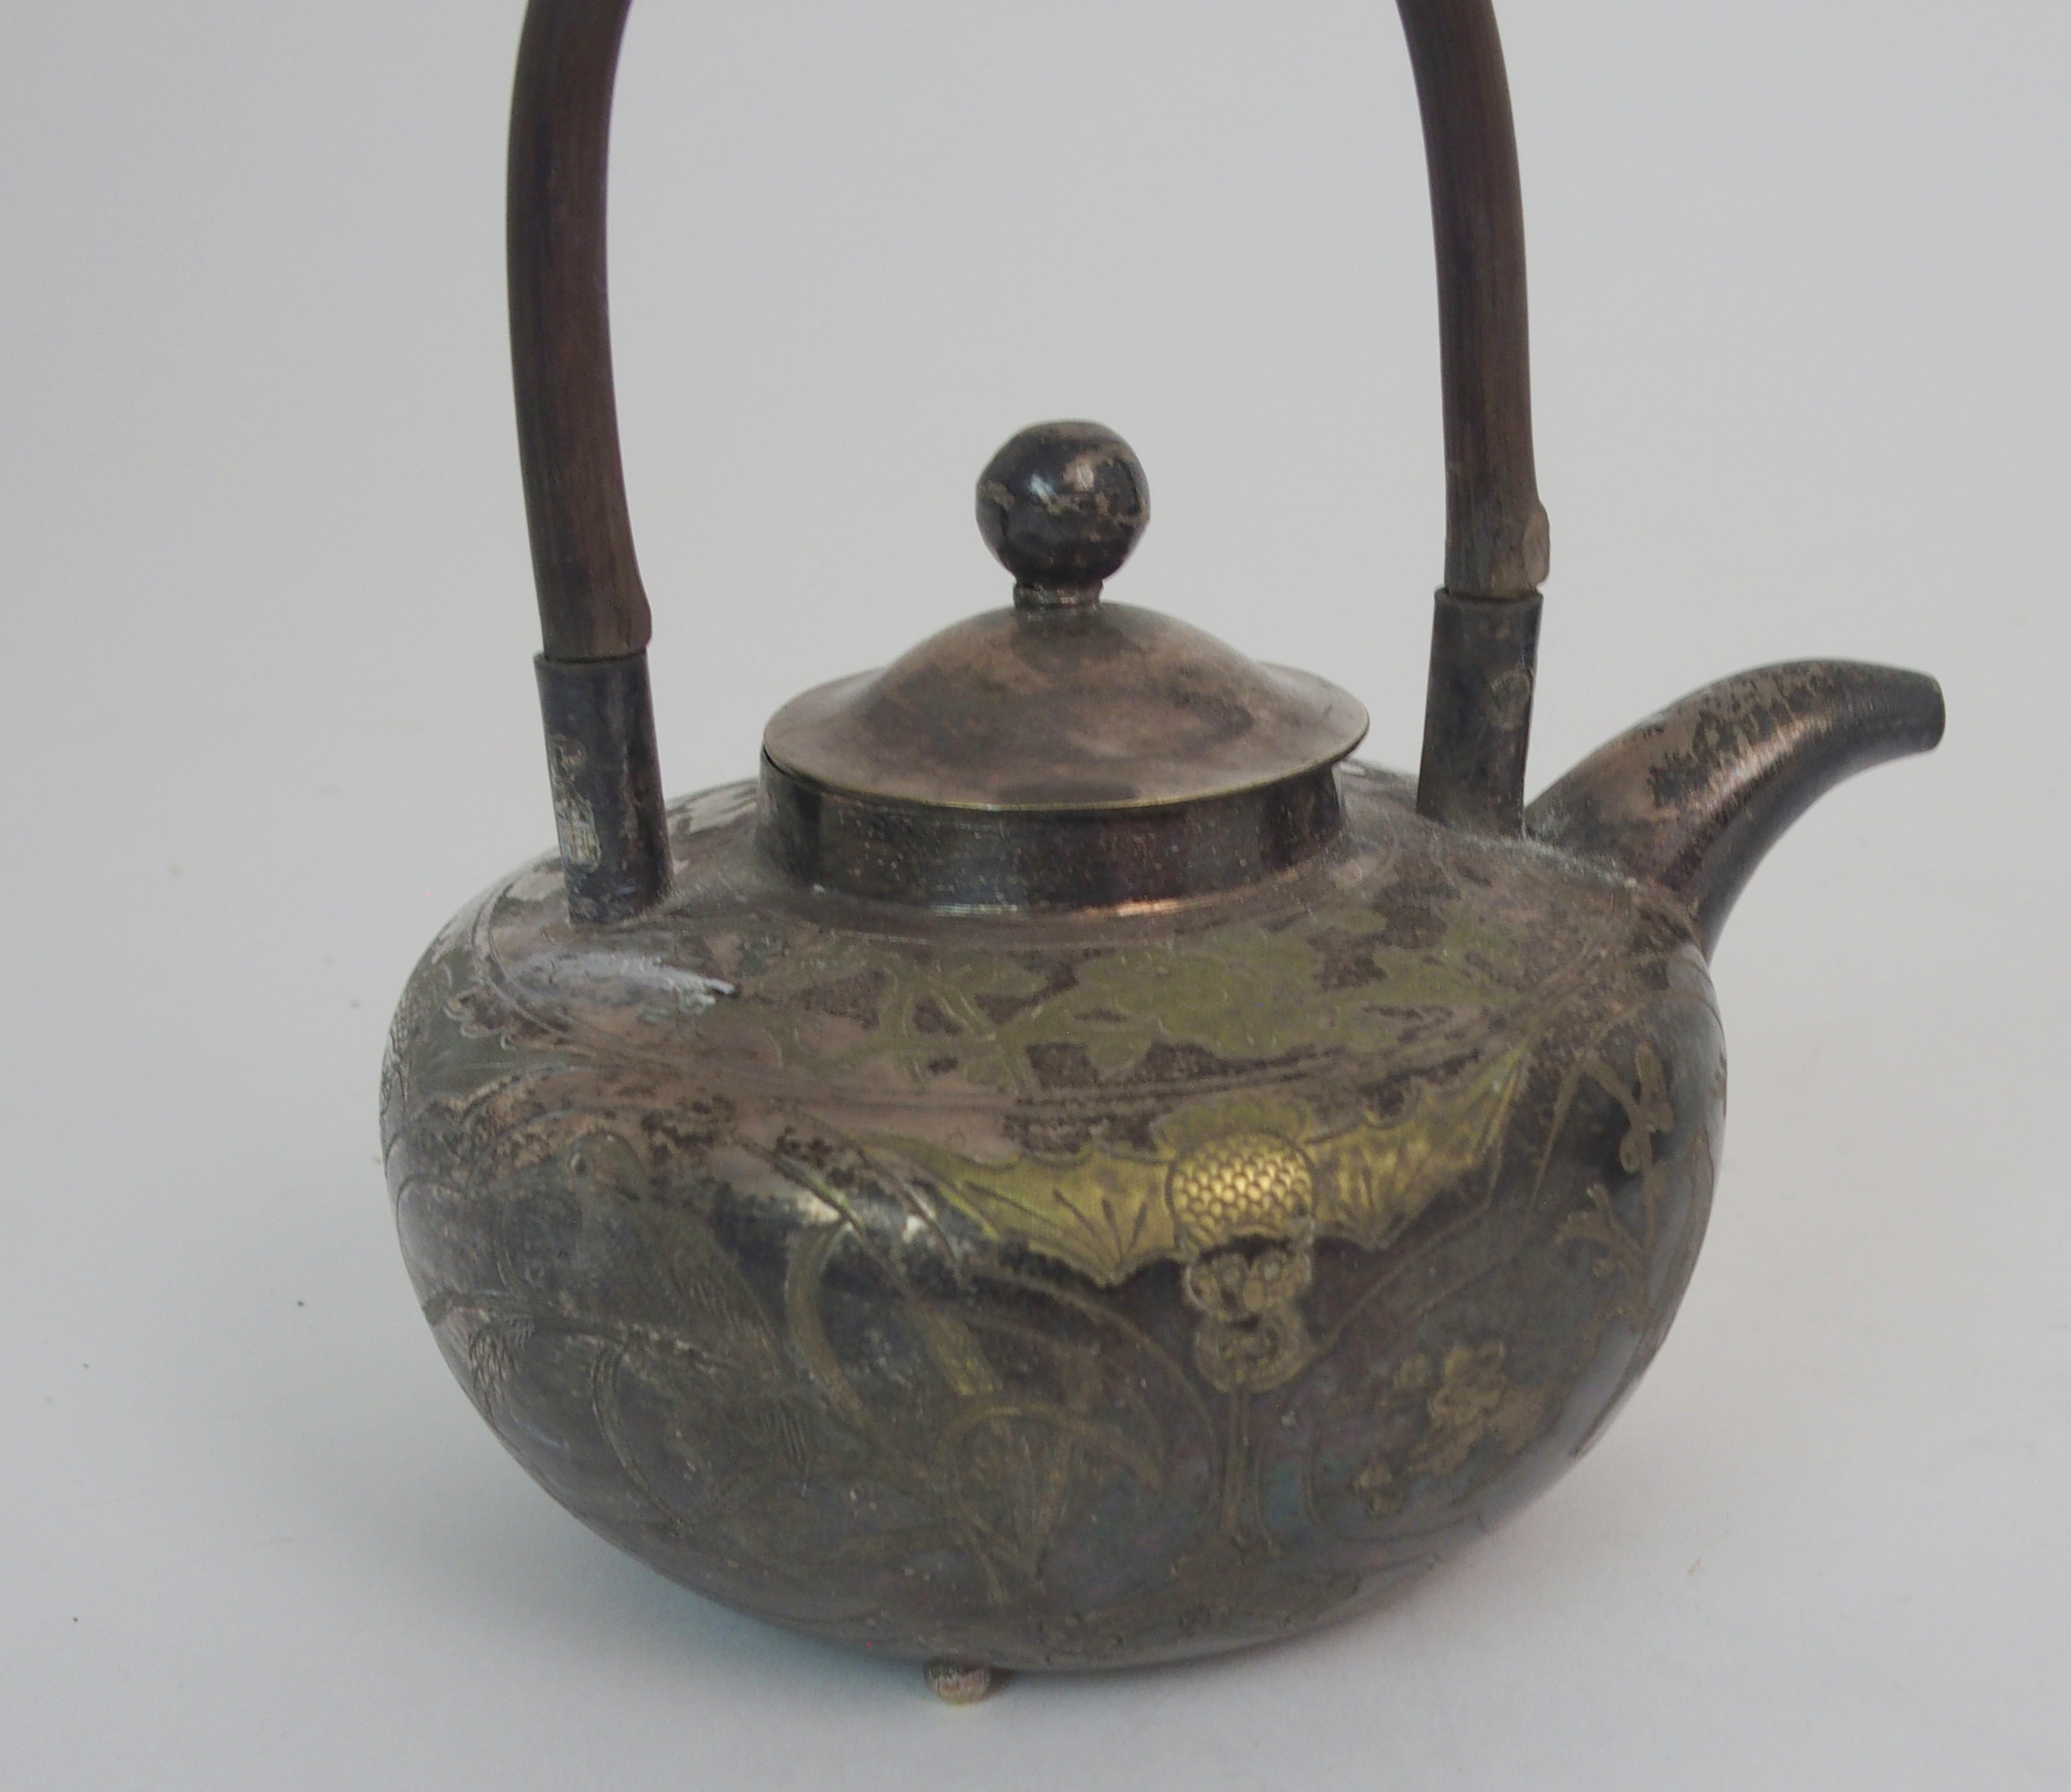 A CHINESE WHITE METAL TEAPOT engraved with panels of fish, birds, foliage and a figure divided by - Image 3 of 7